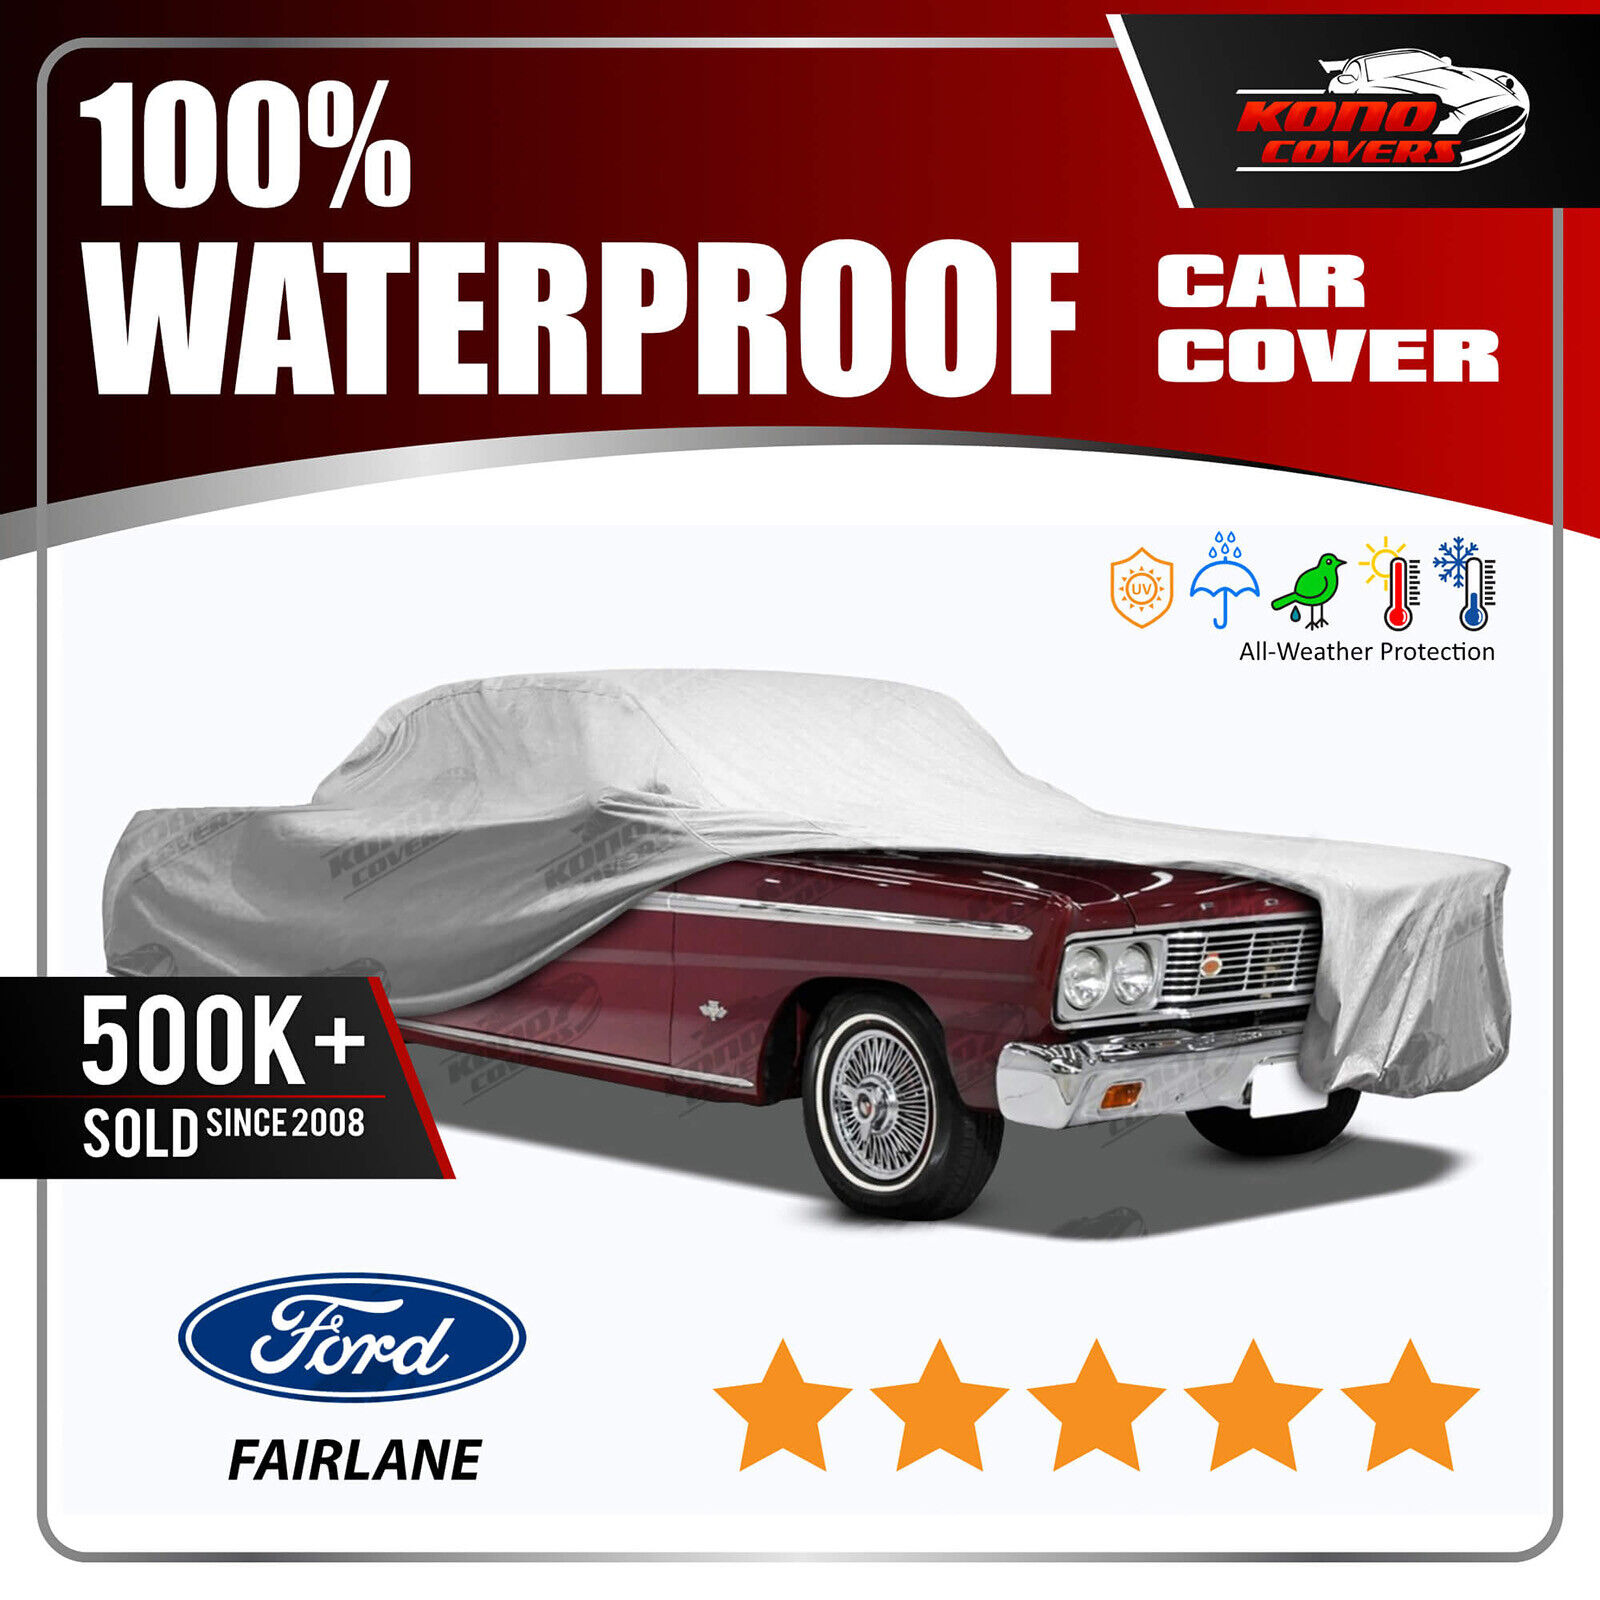 FORD FAIRLANE 2-Door 1962-1965 CAR COVER - 100% Waterproof 100% Breathable